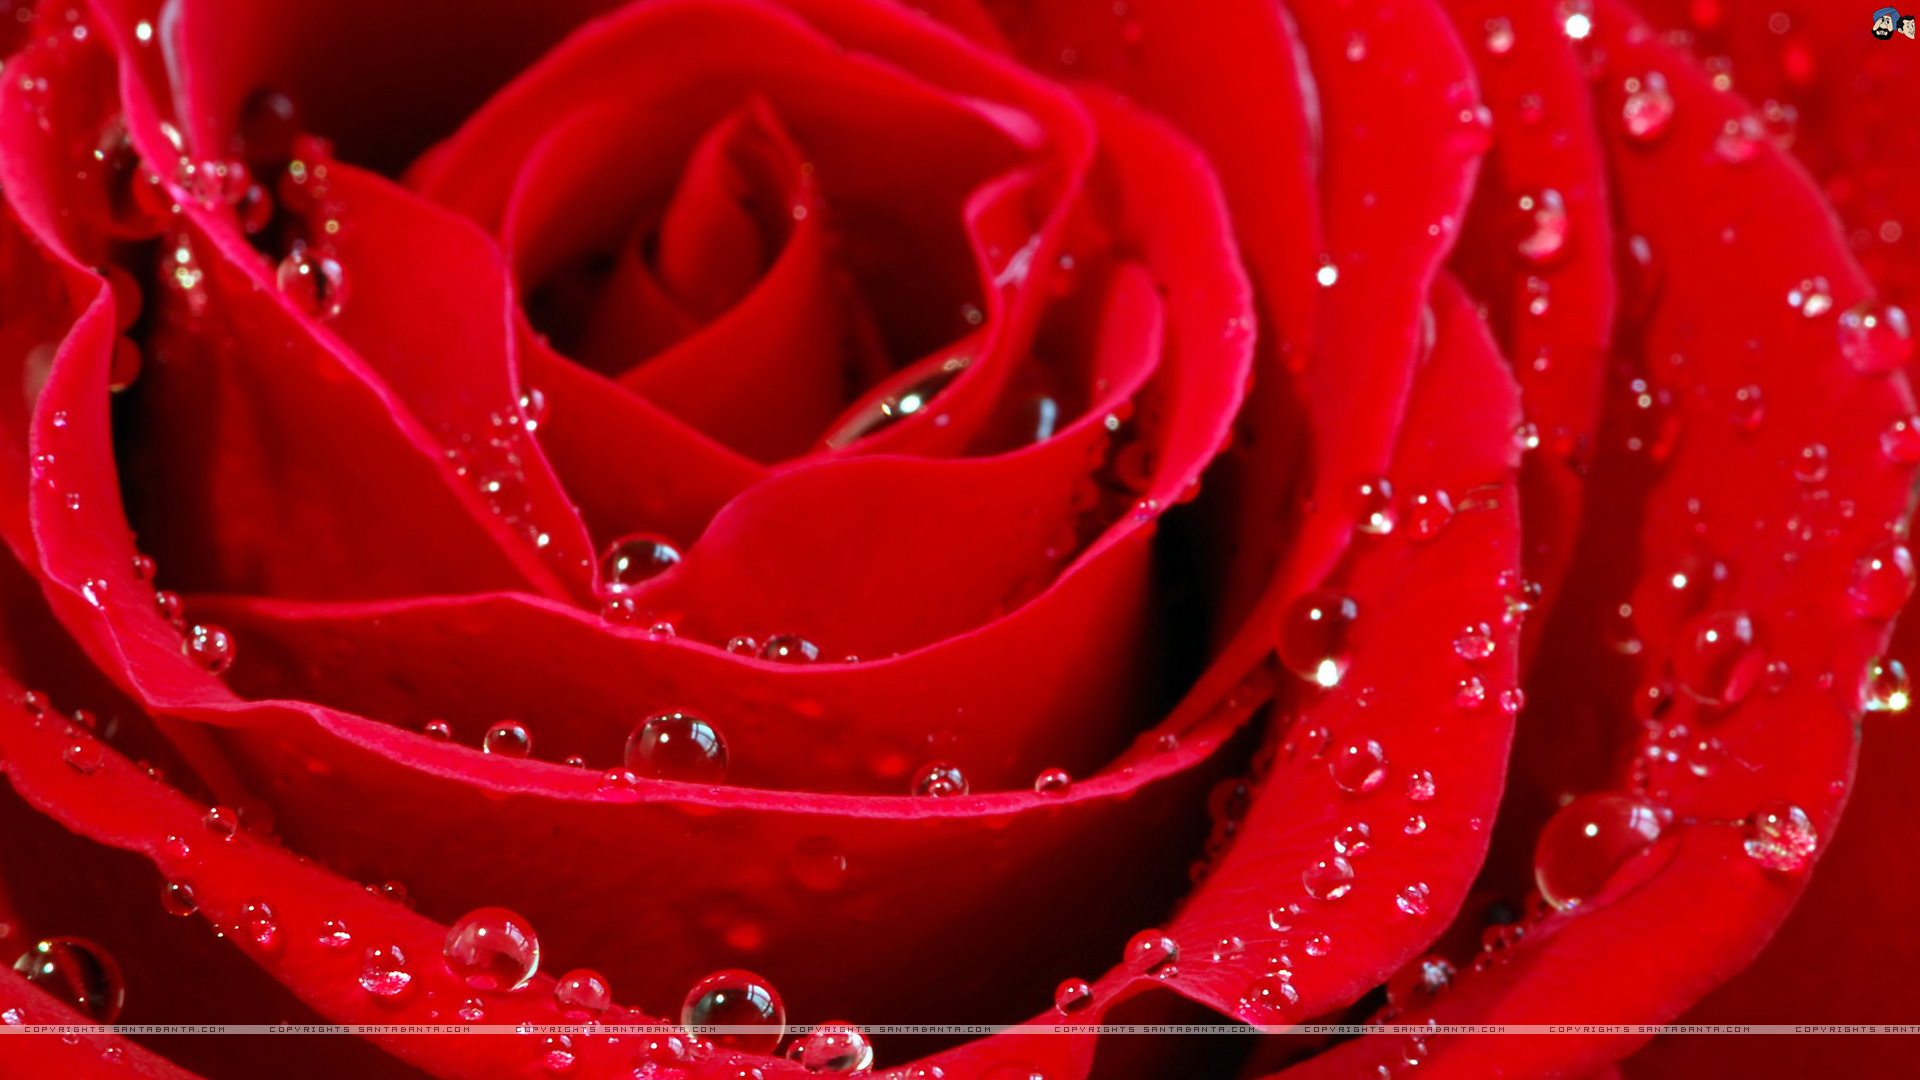 Red And Pink Roses Wallpapers